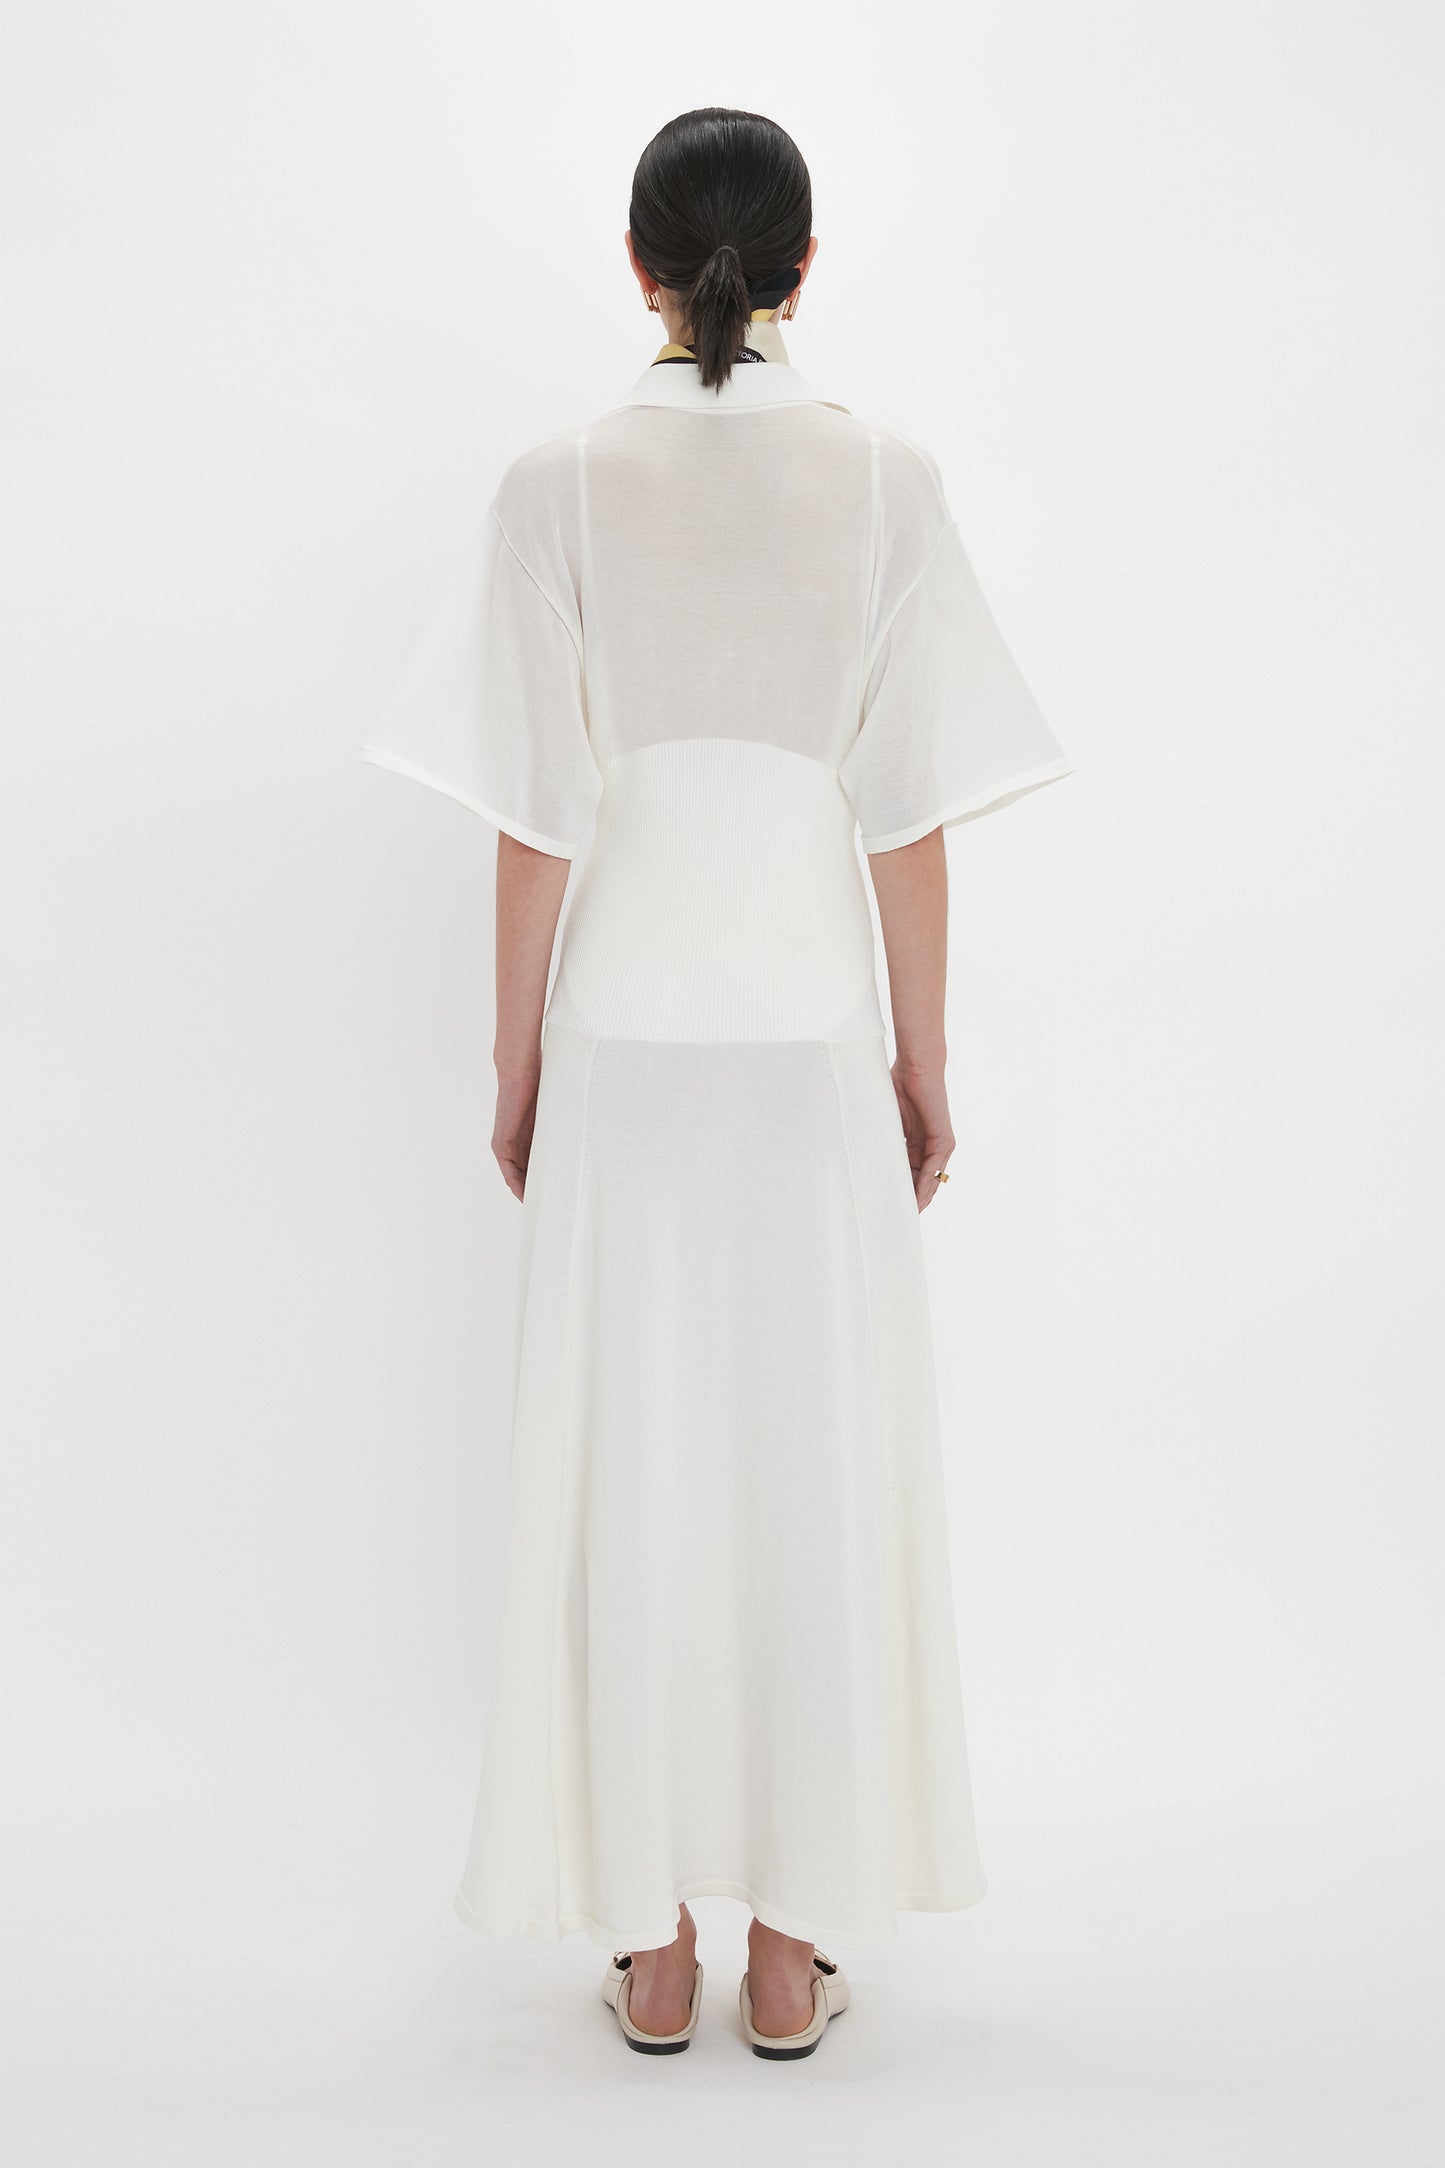 A person with dark hair in a bun is standing with their back to the camera, wearing a long, white, semi-sheer Panelled Knit Dress In White from Victoria Beckham with short sleeves. The background is plain white.